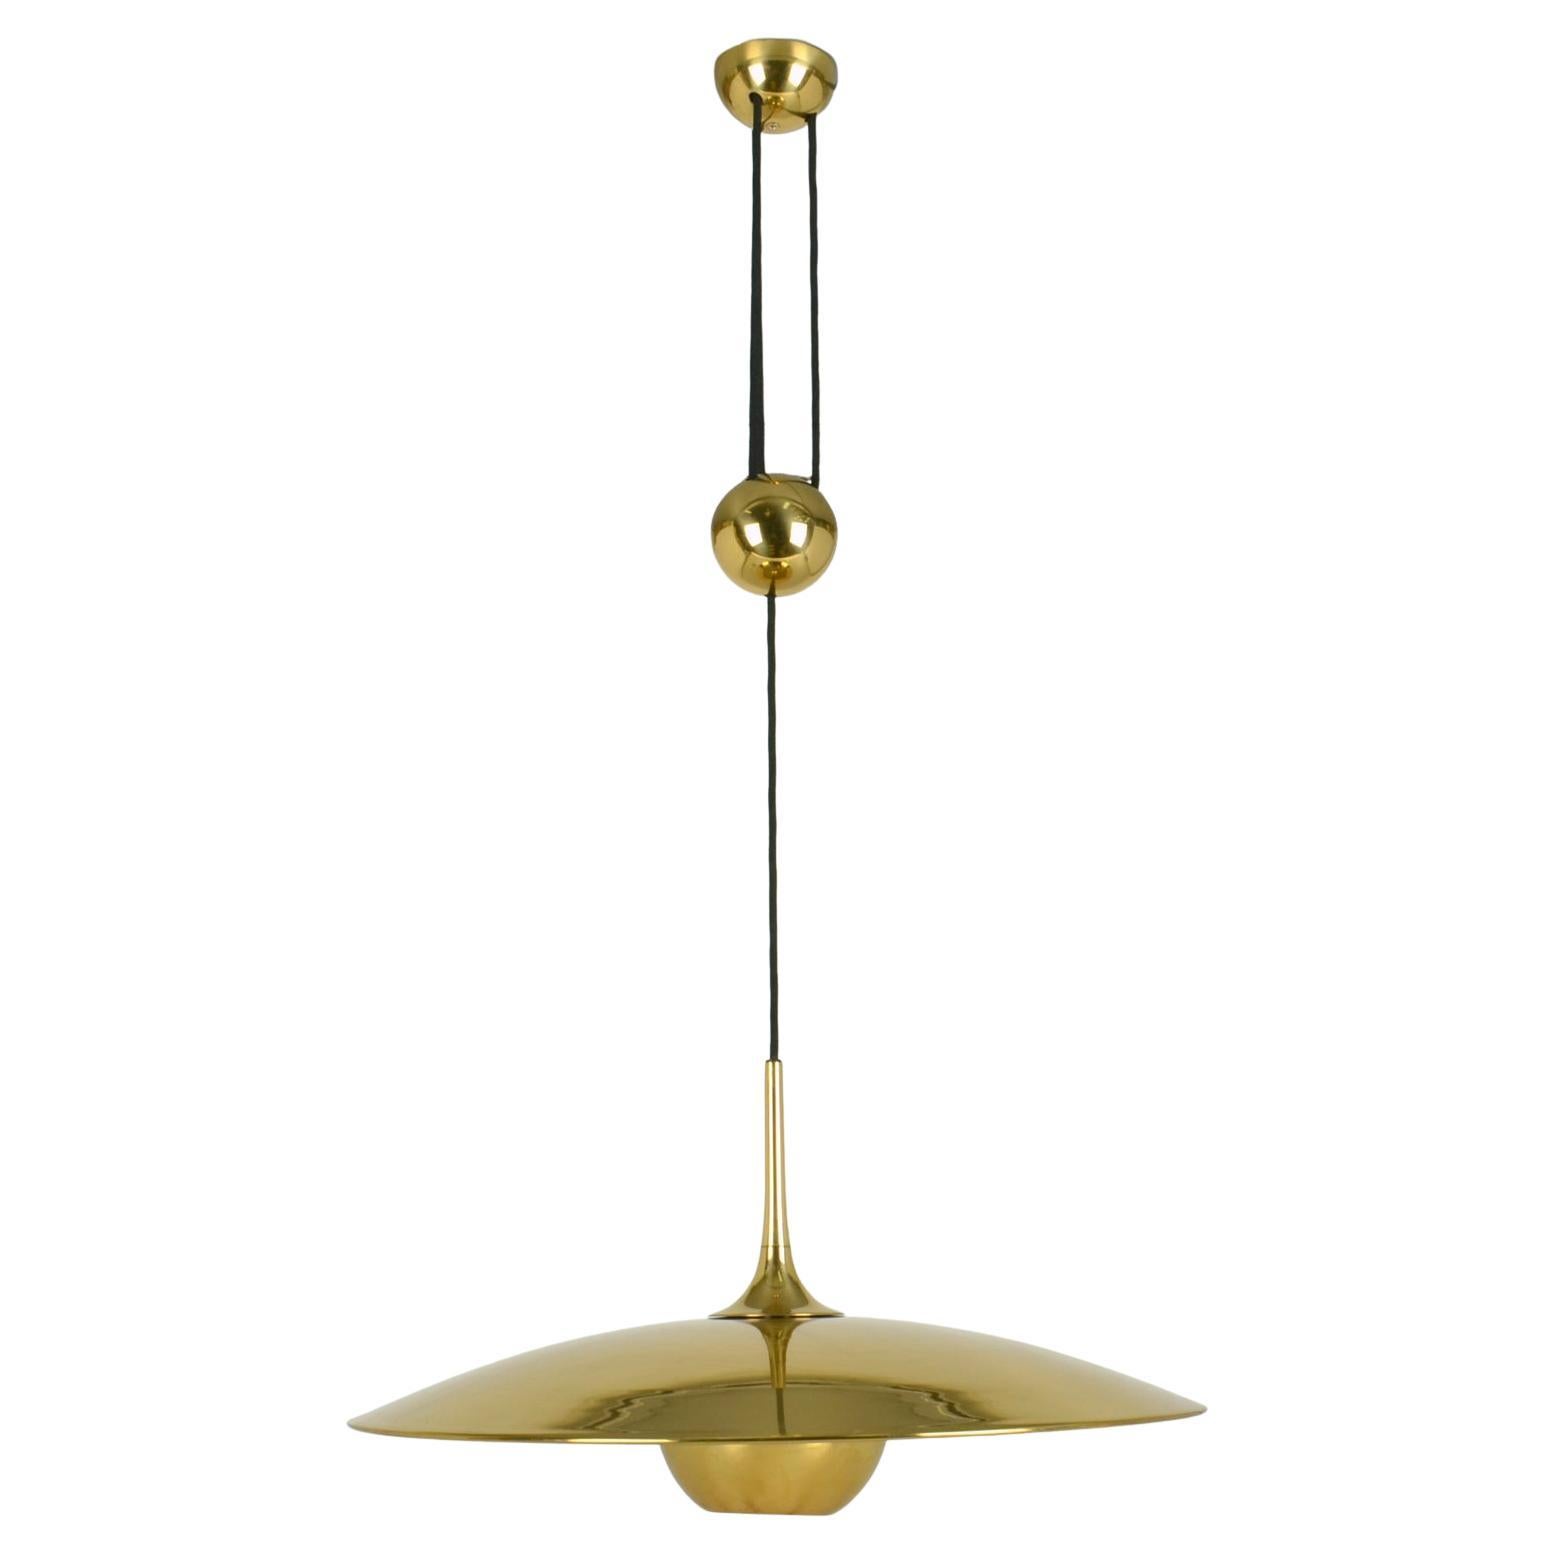 Original counterbalance pendant Onos 55 by Florian Schulz. This elegant and minimal pendant in a high quality polished brass, moves smoothly up and down due to the solid brass center counterweight. The shade has a brass diffuser. 
Excellent